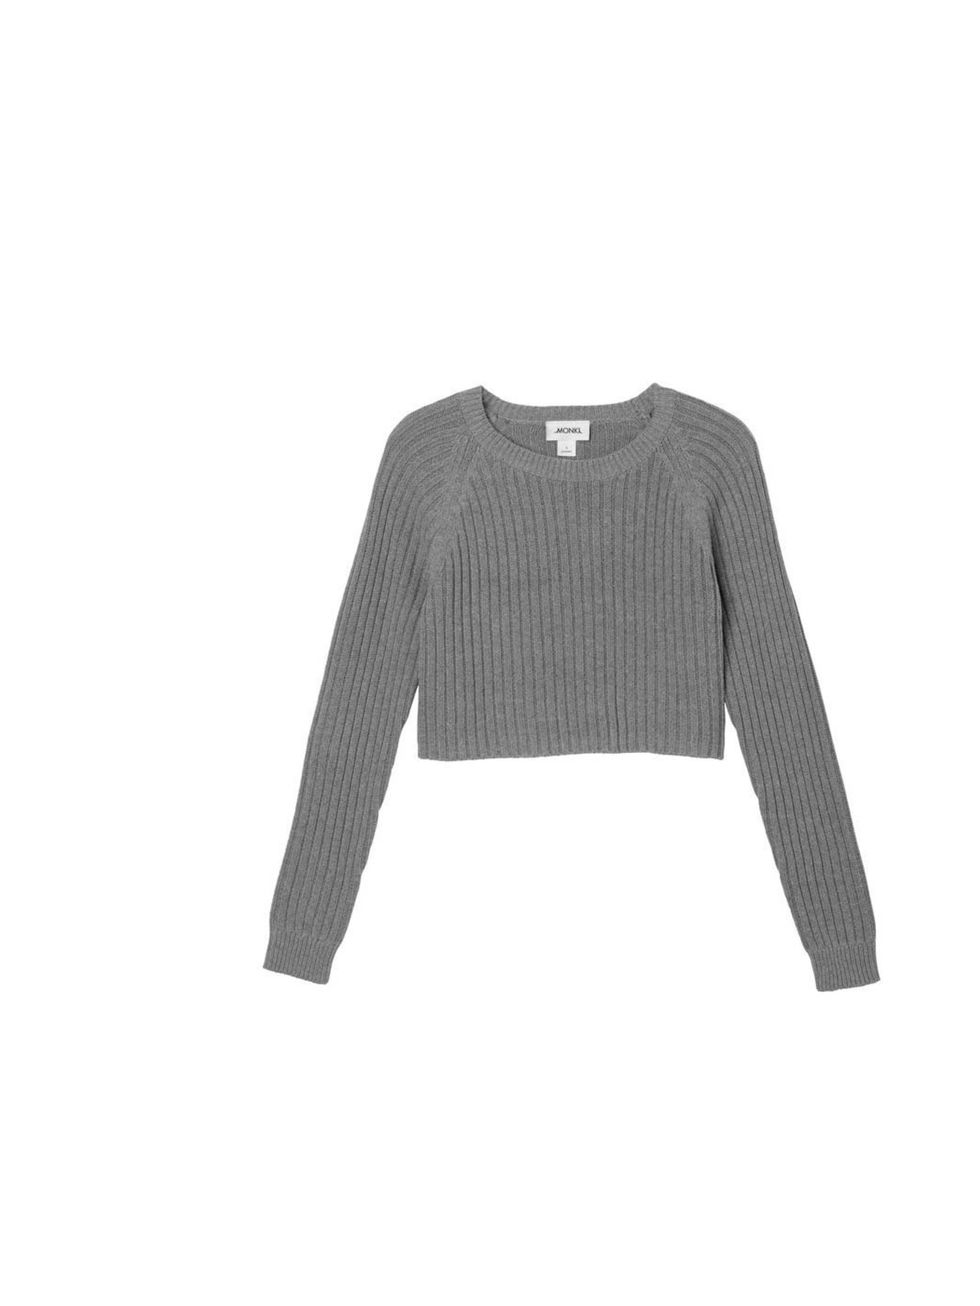 <p>Associate Health & Beauty Editor Amy Lawrenson loves high street brand Monki. She'll layer this cropped knit over a shirt and jeans.</p><p><a href="http://www.monki.com/Shop/View_All/Bo_knitted_top/18669-5855133.1">Monki</a> jumper, £20</p>